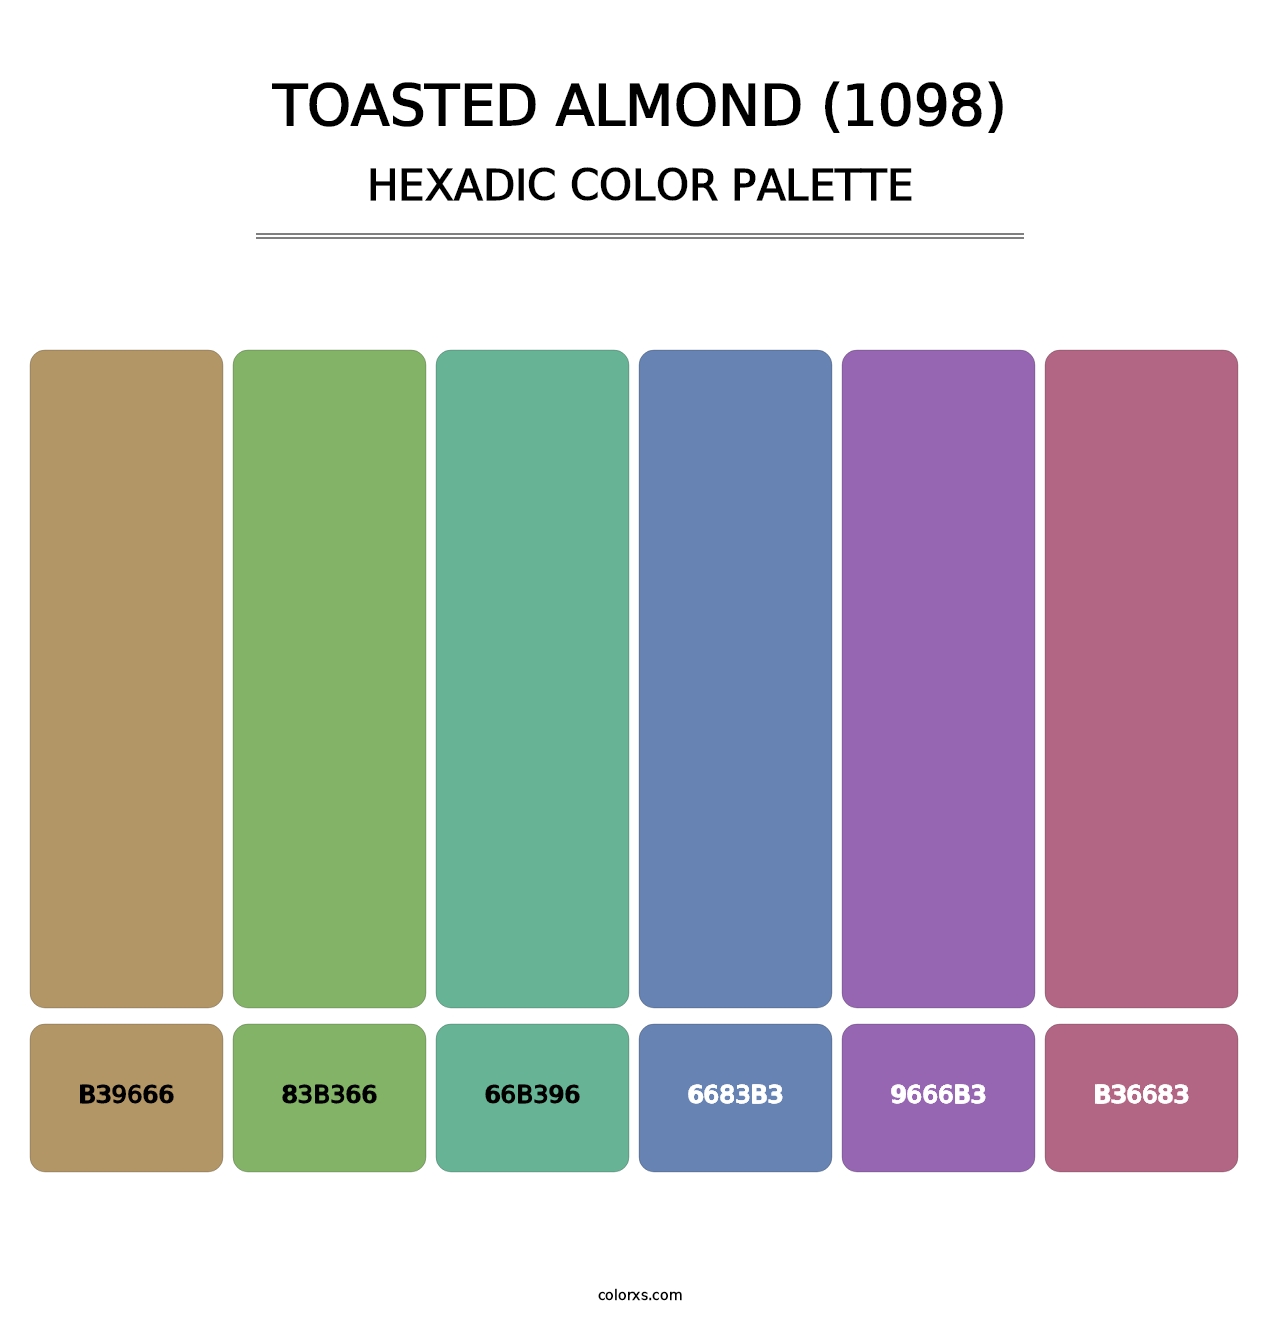 Toasted Almond (1098) - Hexadic Color Palette